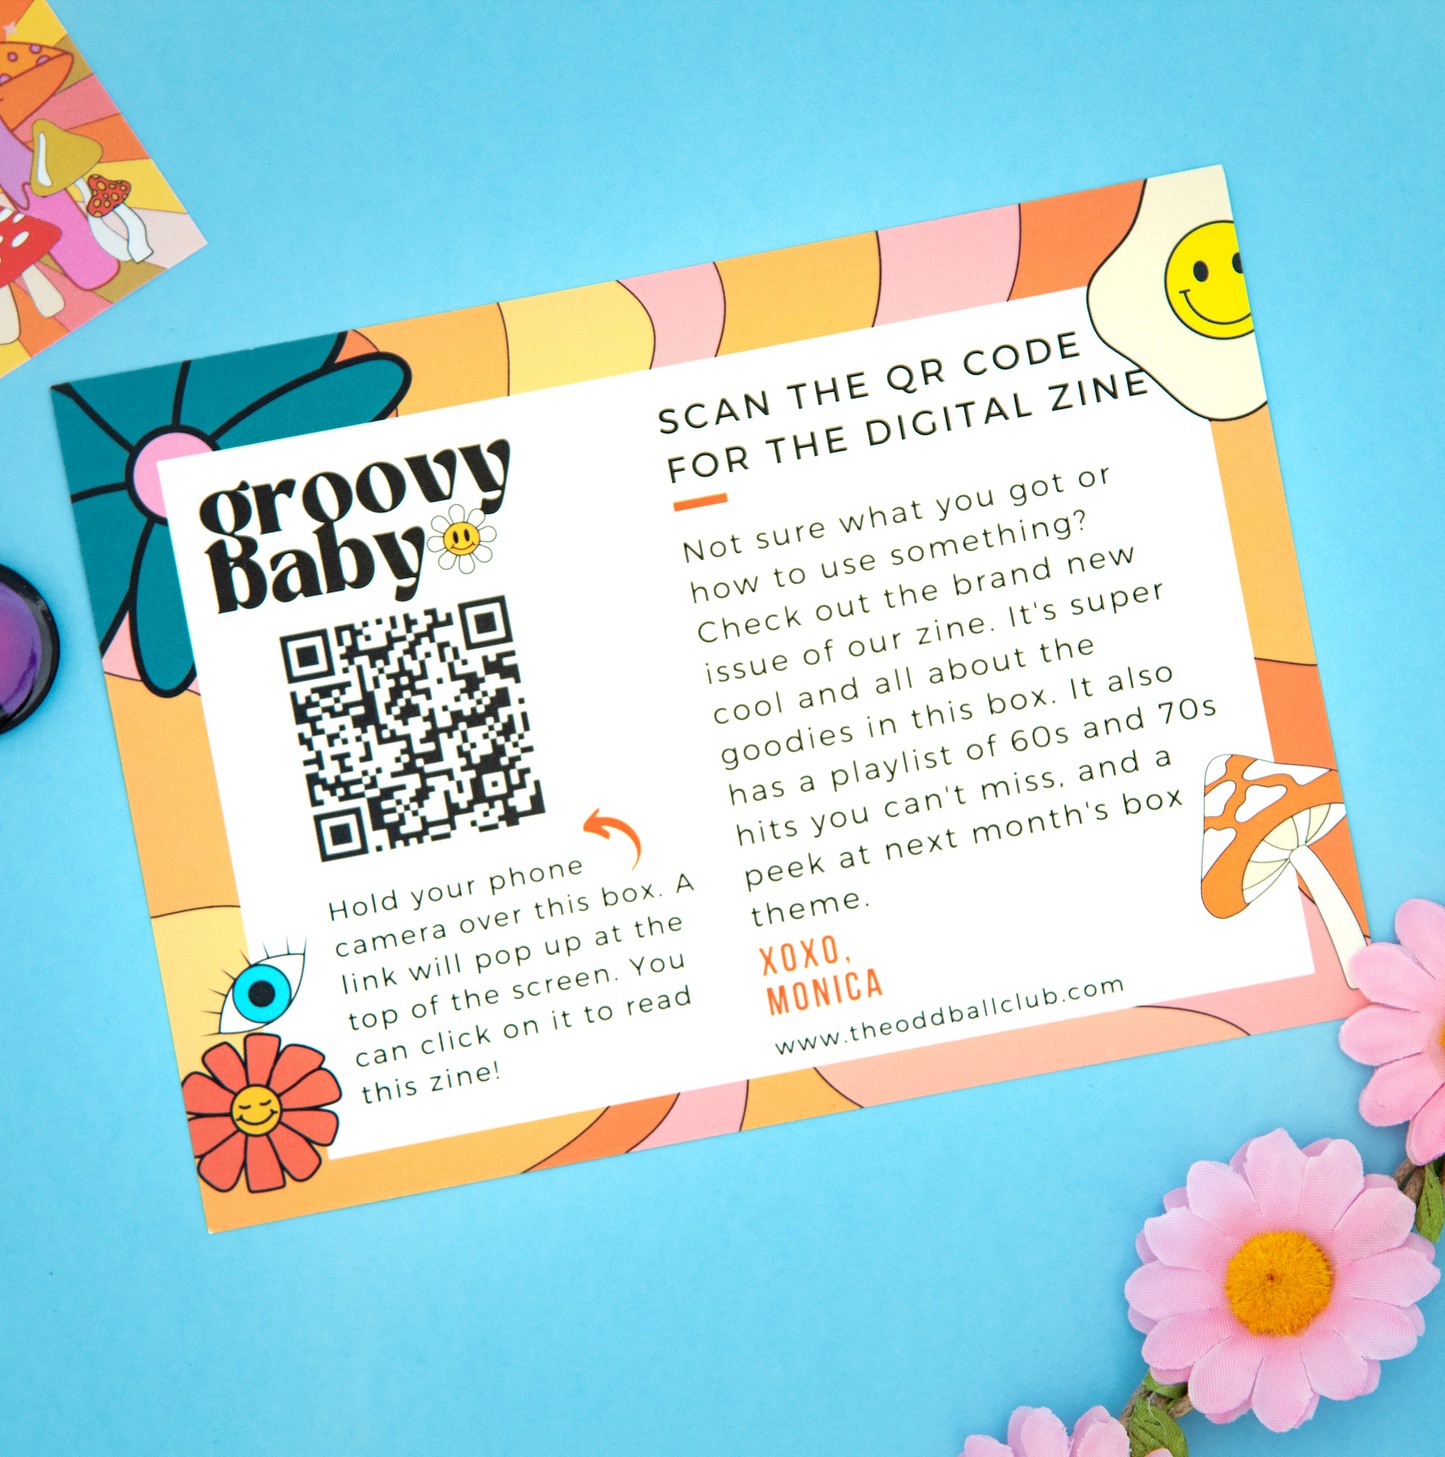 Groovy Baby" graphic paper with instructions to scan QR code and access online zine - perfect for vintage and retro enthusiasts looking for unique content - The Oddball Club